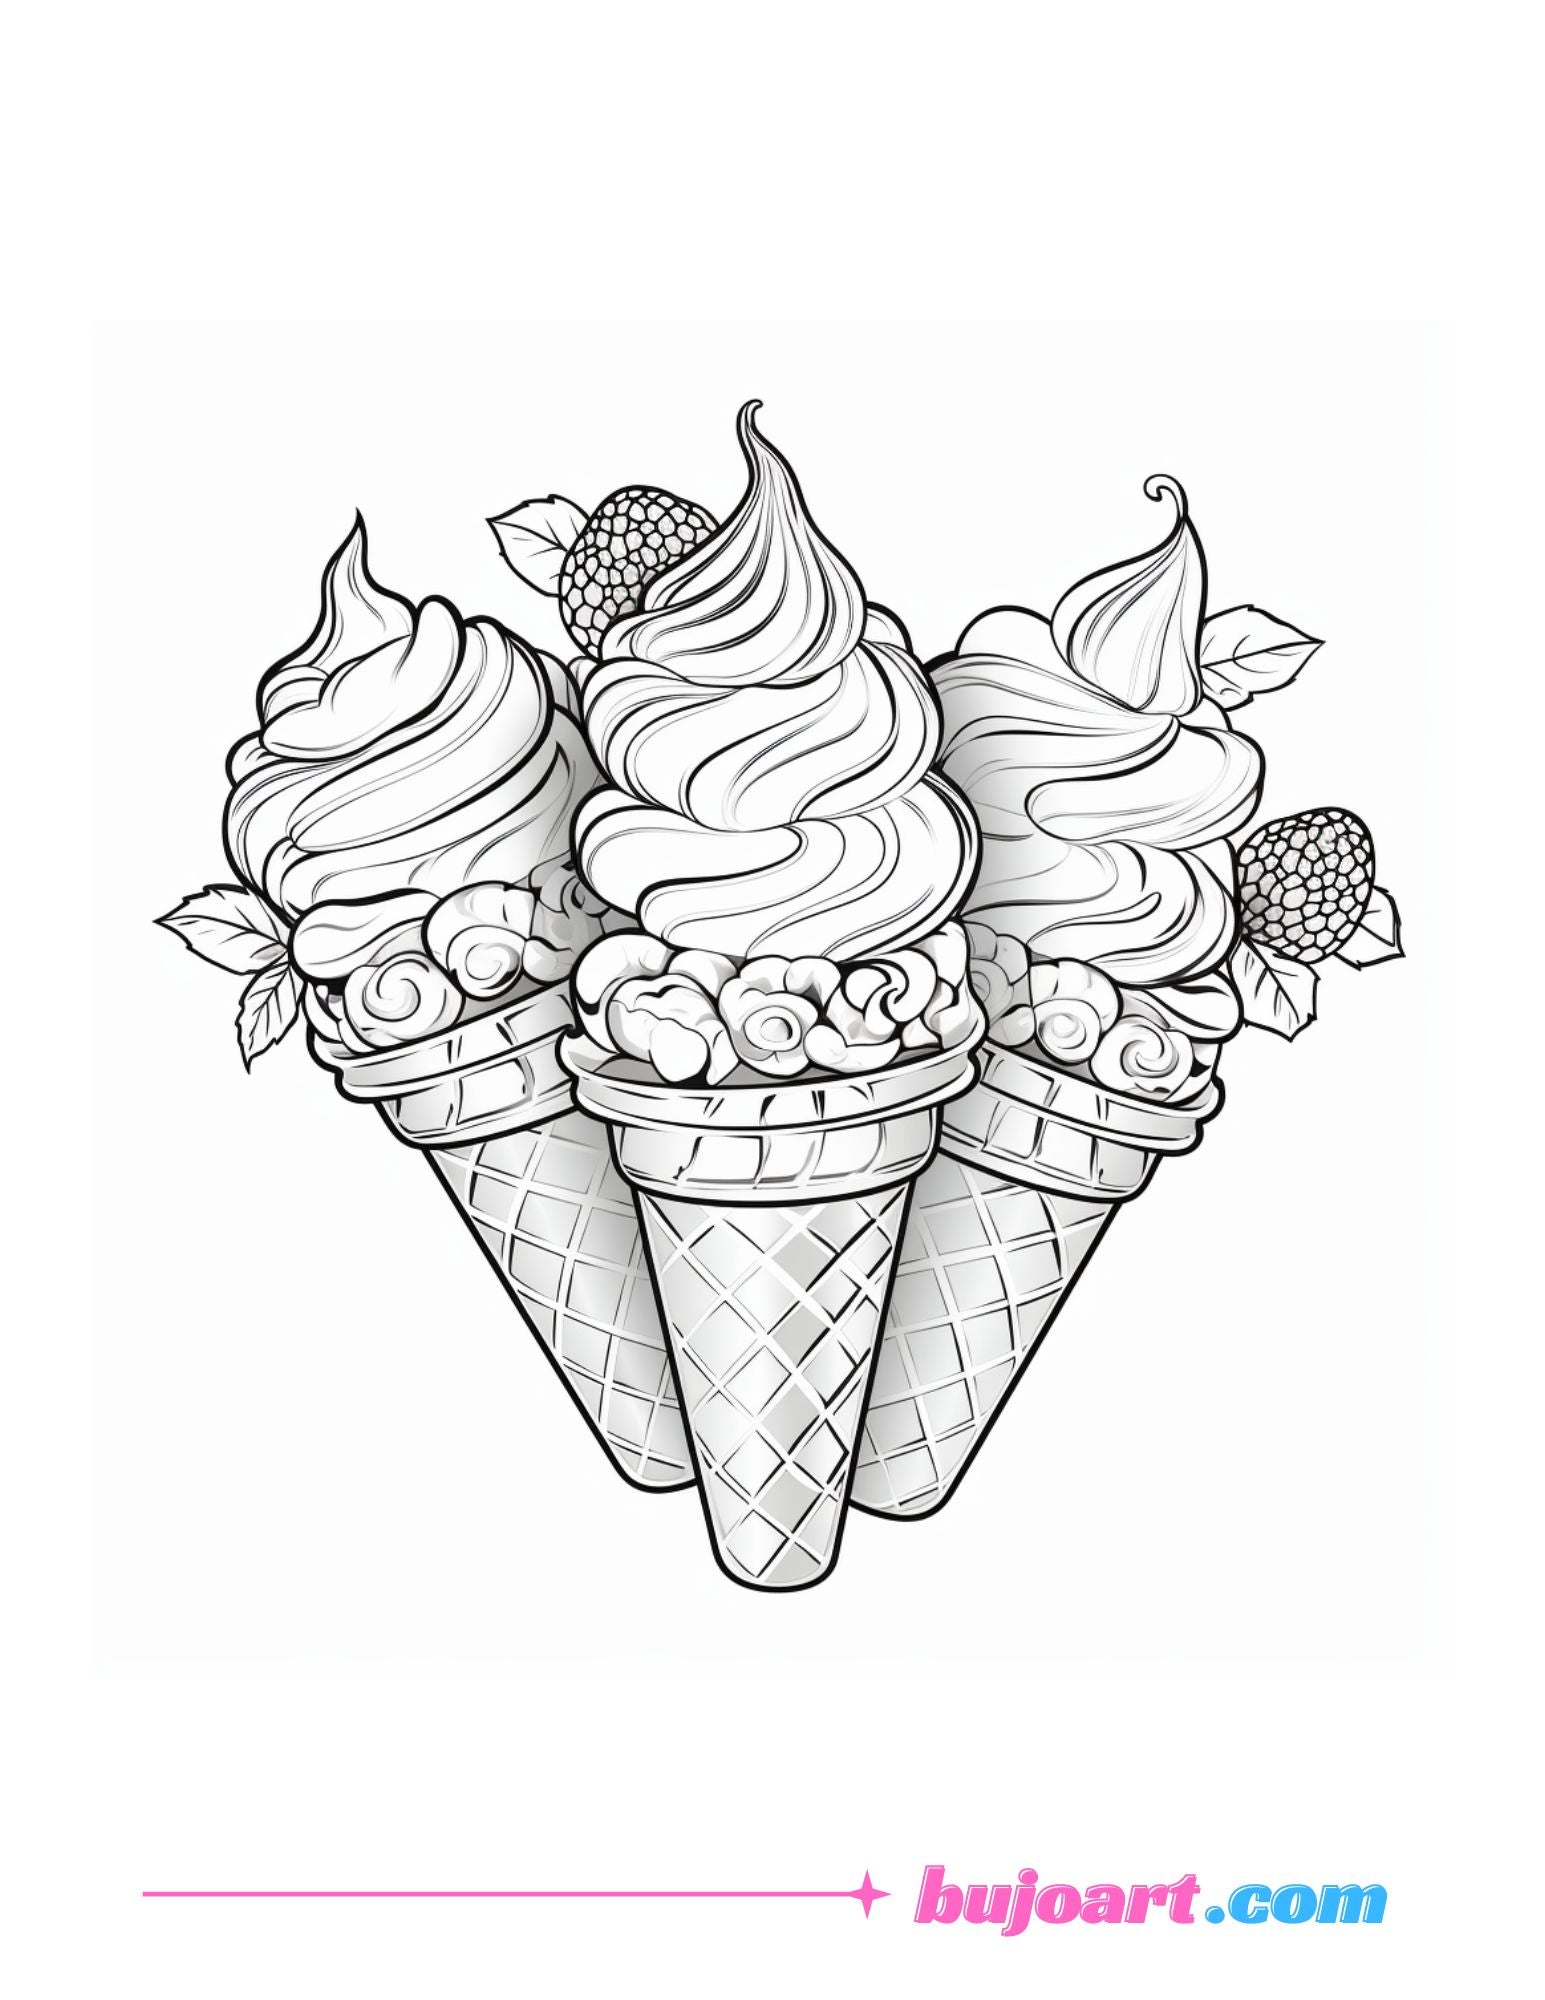 12 free icecream coloring pages for adults and kids instant download ...